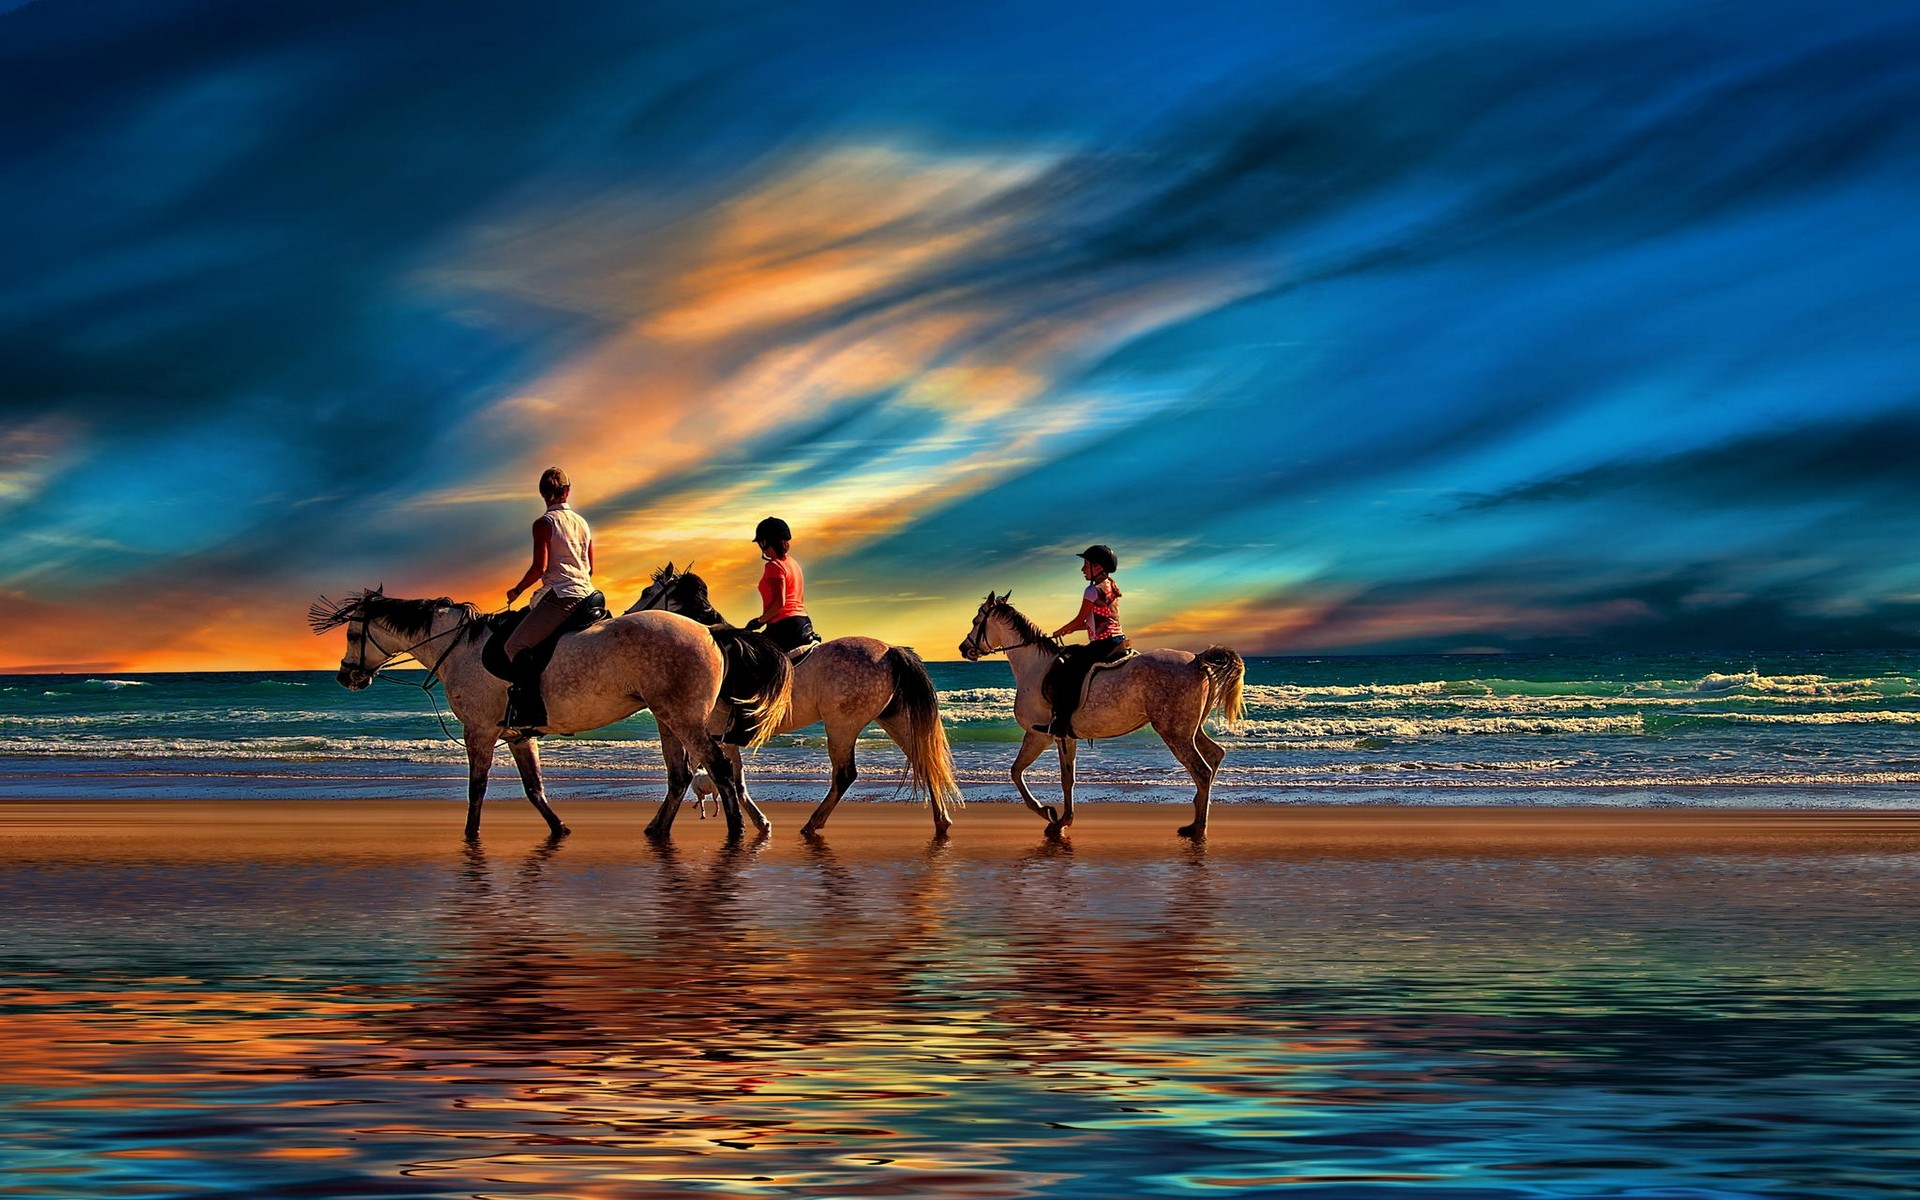 General 1920x1200 nature landscape beach sunset sea clouds family horse sand water animals mammals sky